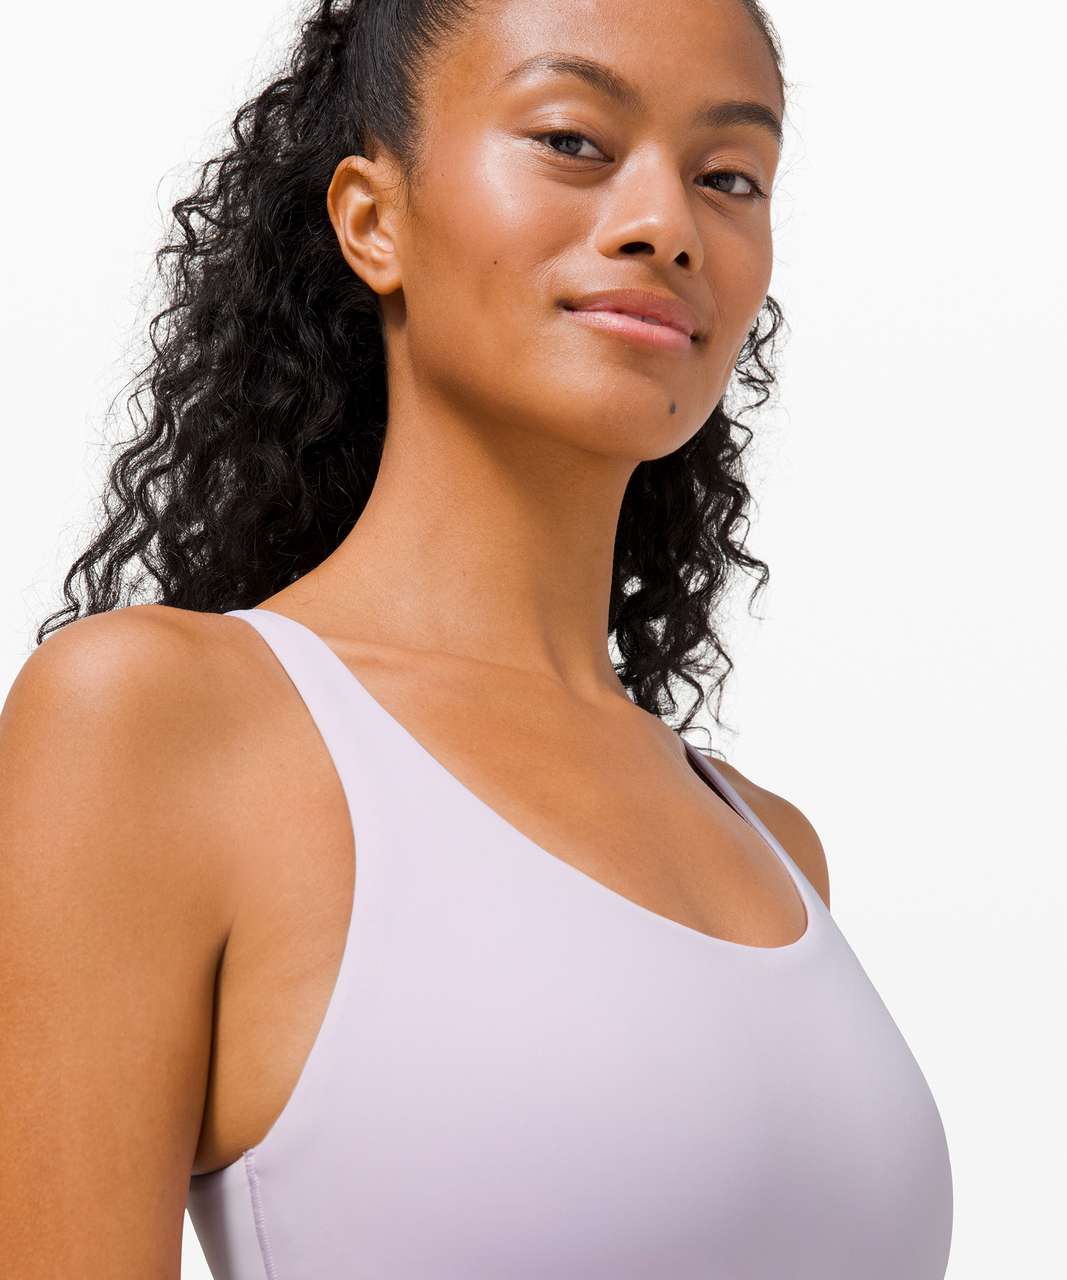 Three bras/tanks that I never thought I would like - Wunder Train LL (Night  Sea), Align Tank (Chambray), In Alignment LL (Lavender Dew) : r/lululemon